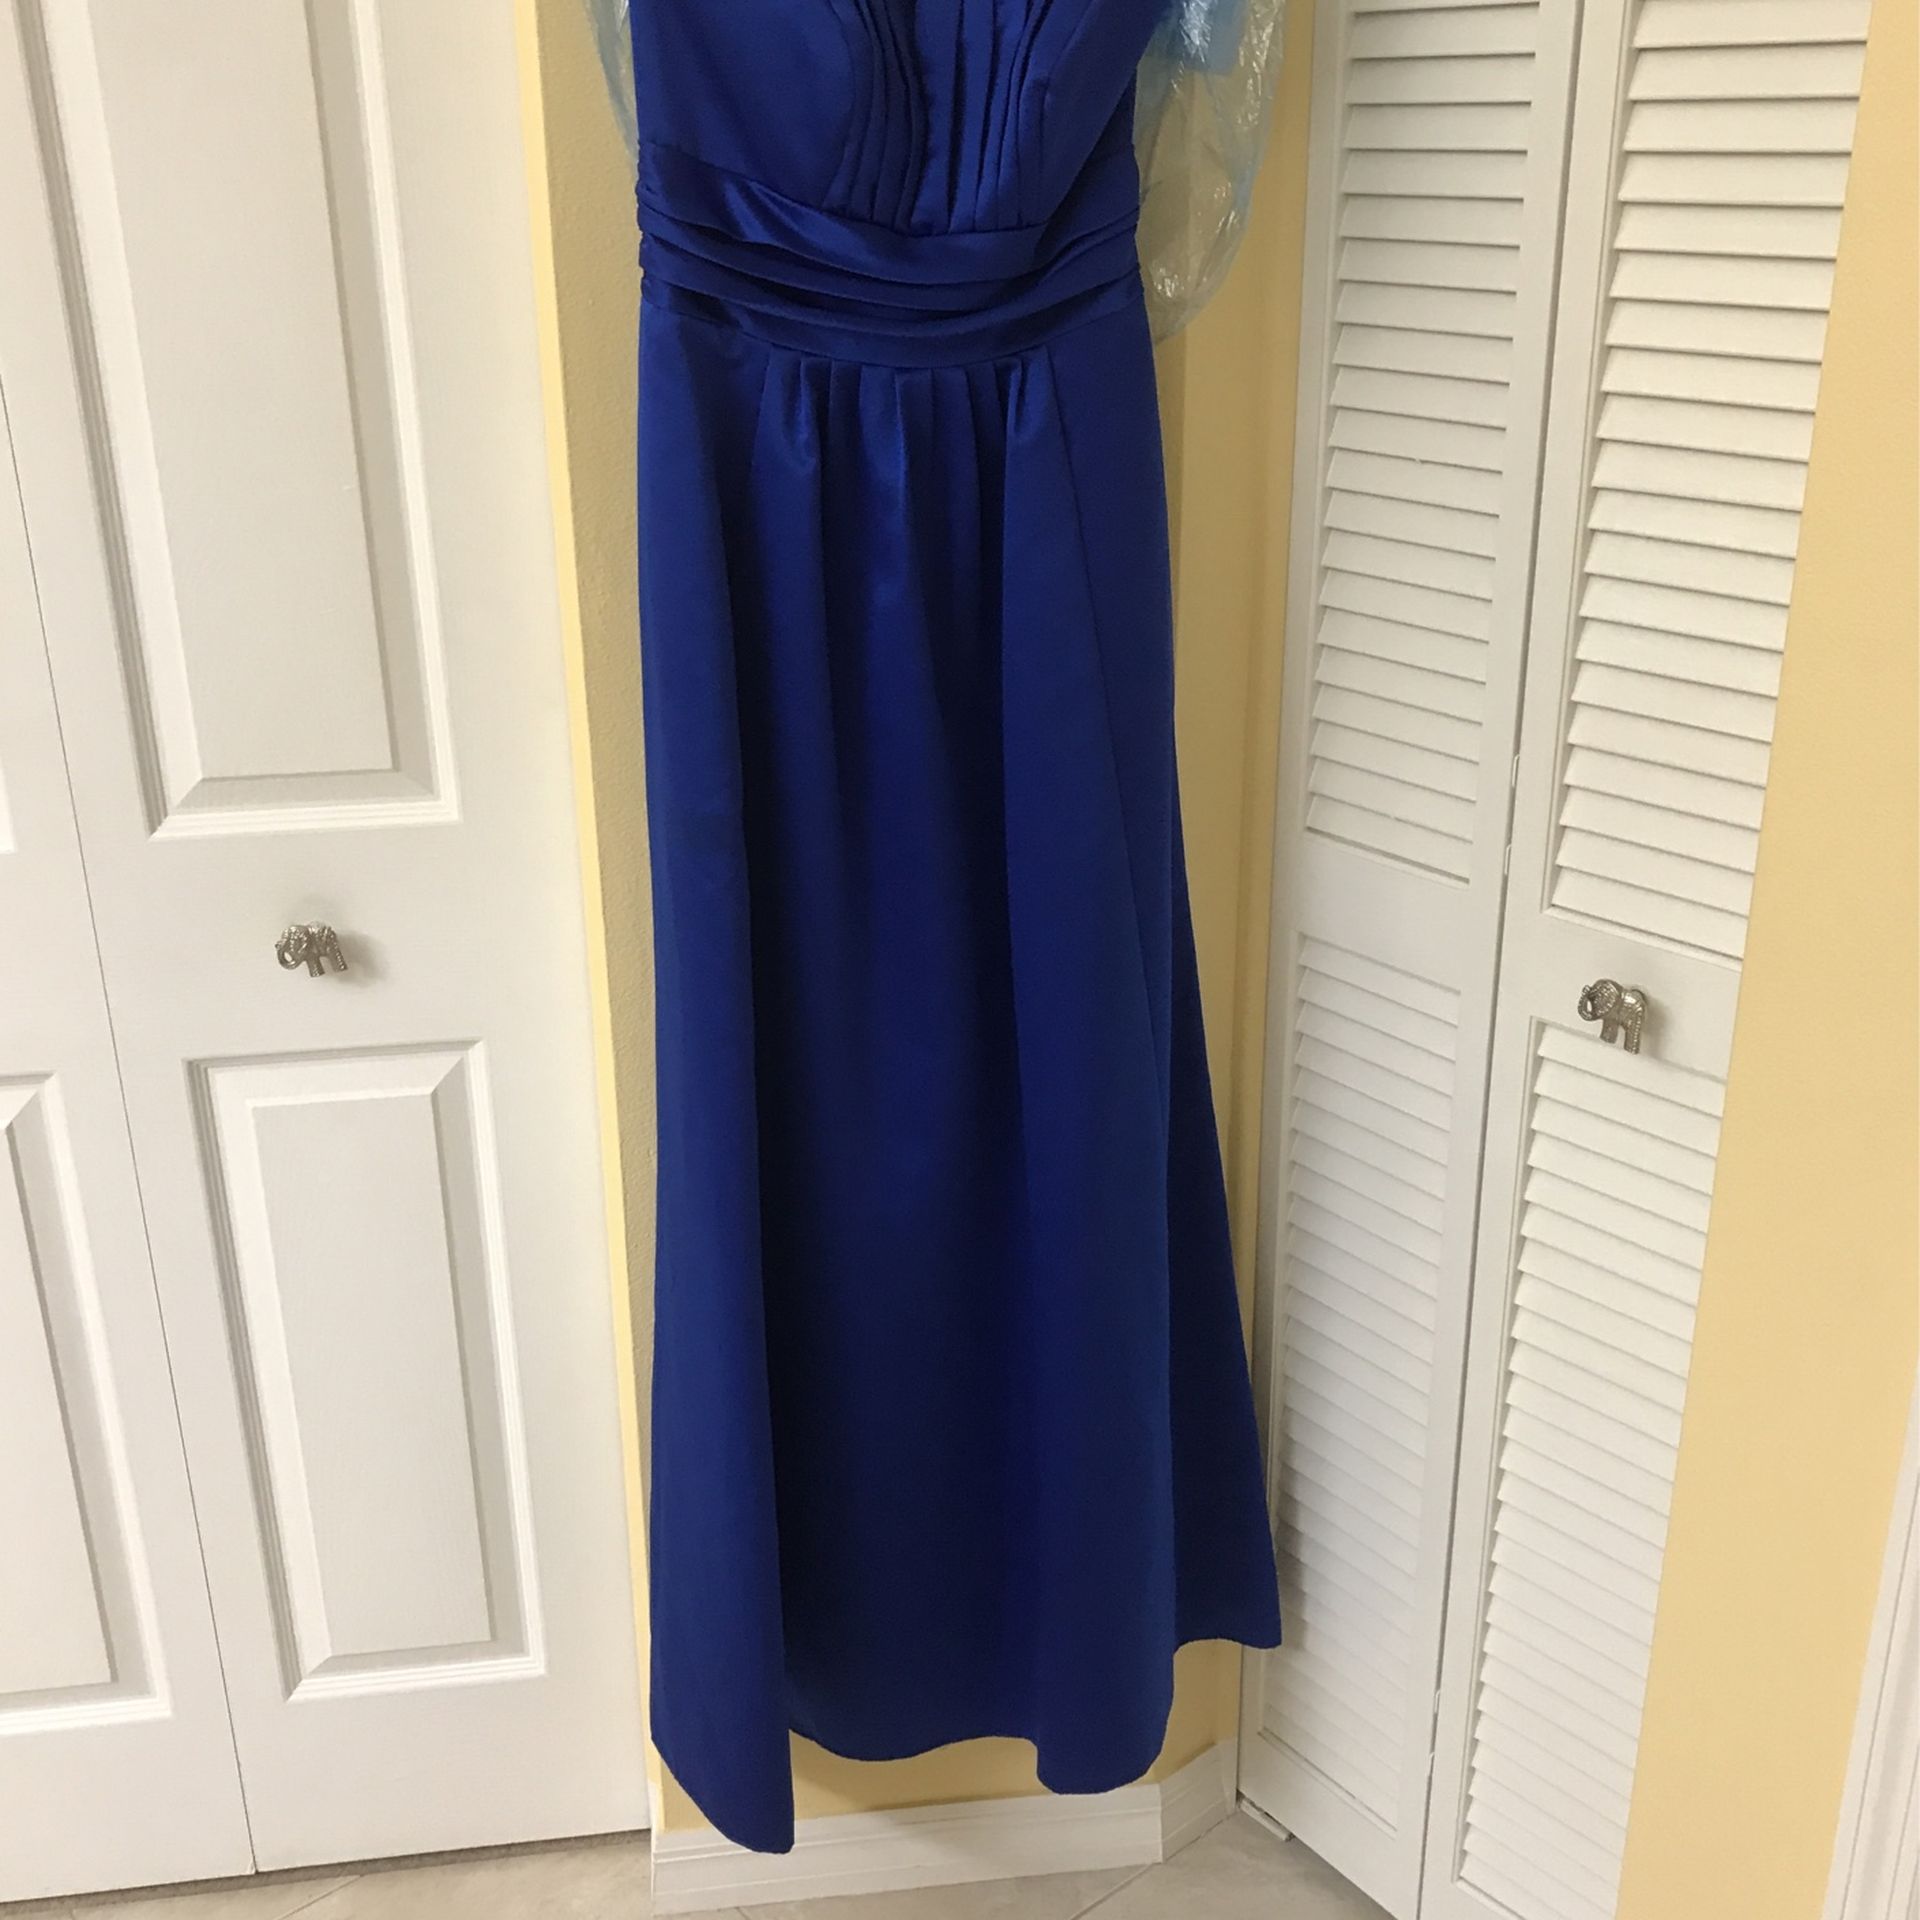 Size 6, From David’s bridal. Strapless for prom, weddings, social events. Asking $25